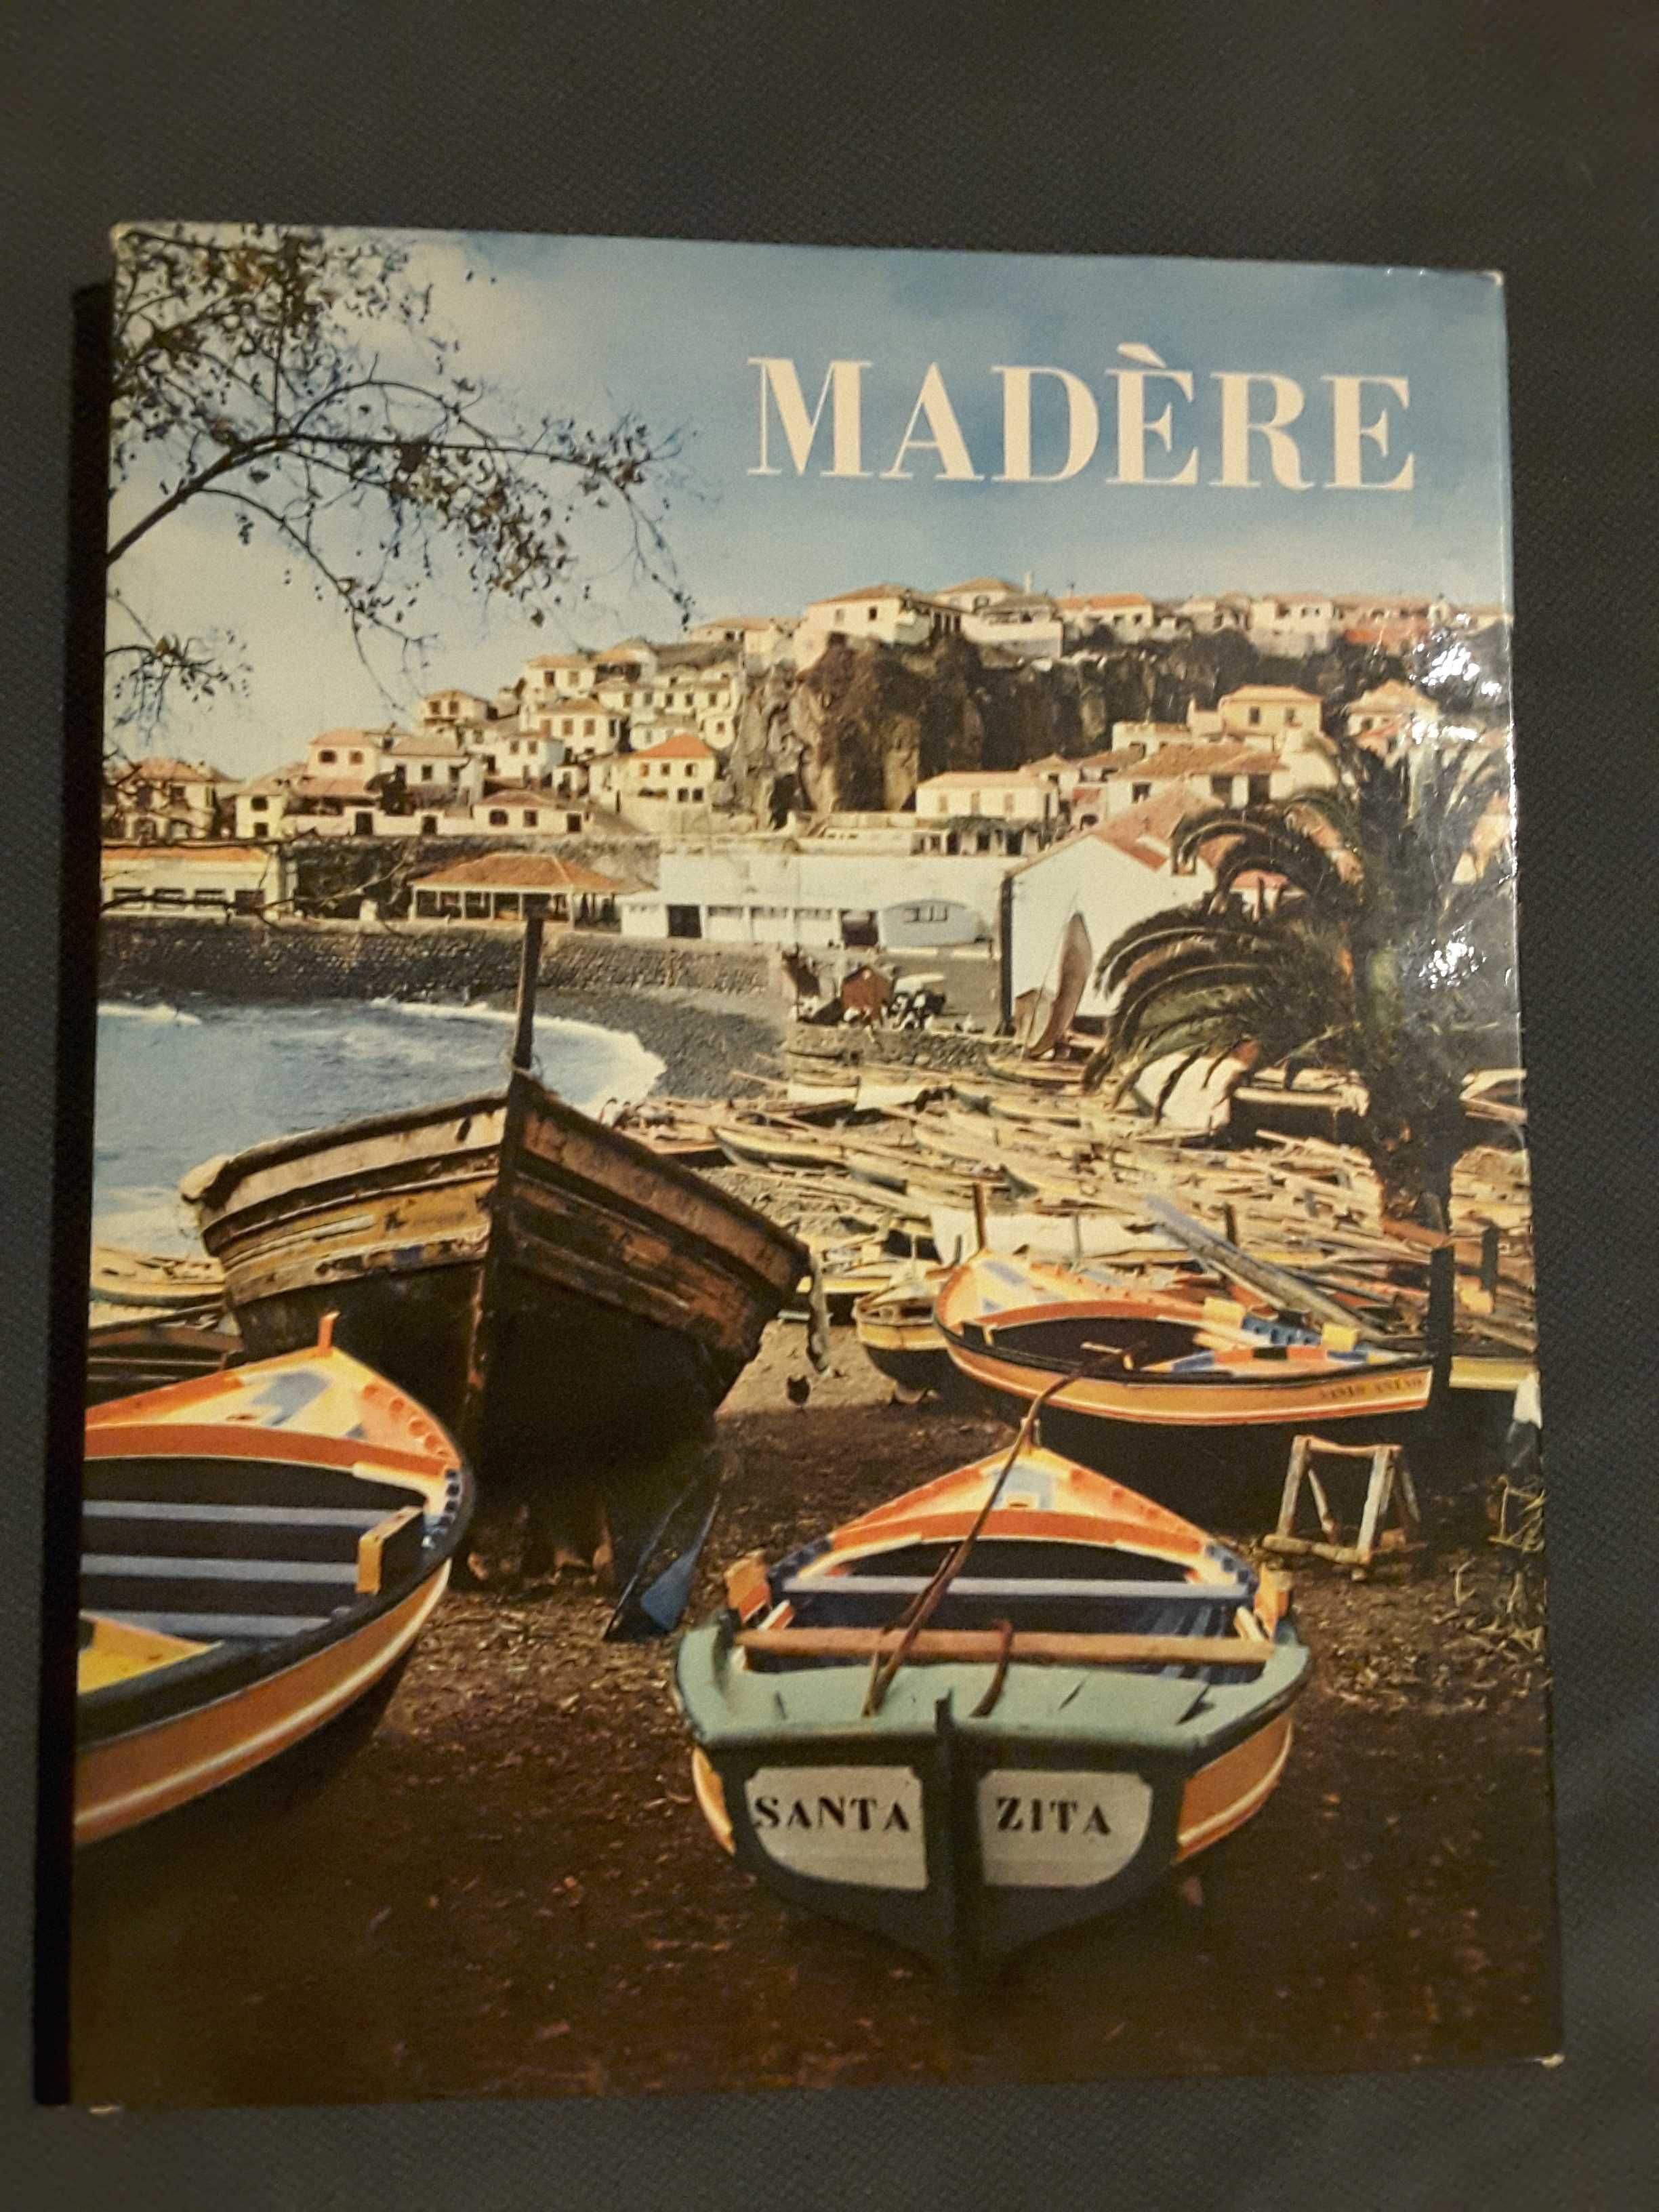 Algarve and Southern Portugal (1974) / Madeira (1955)